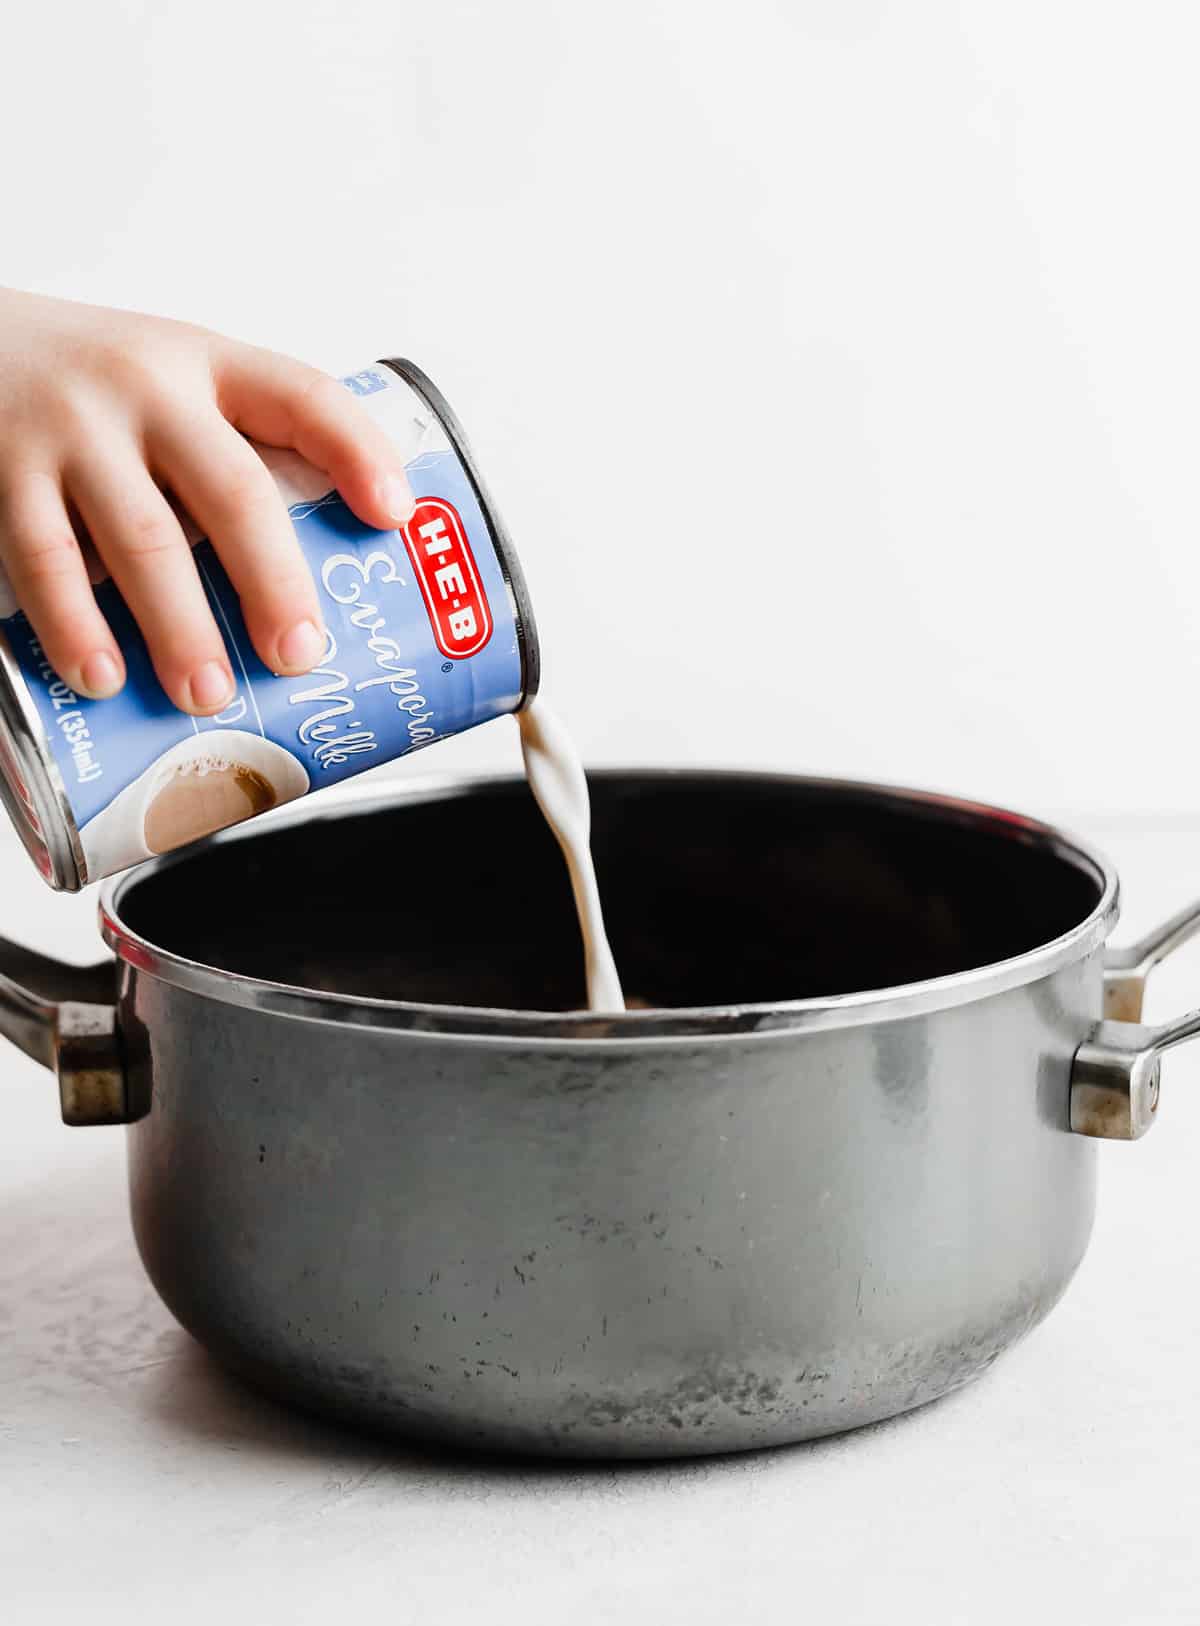 A hand pouring a can of evaporated milk into a gray saucepan.